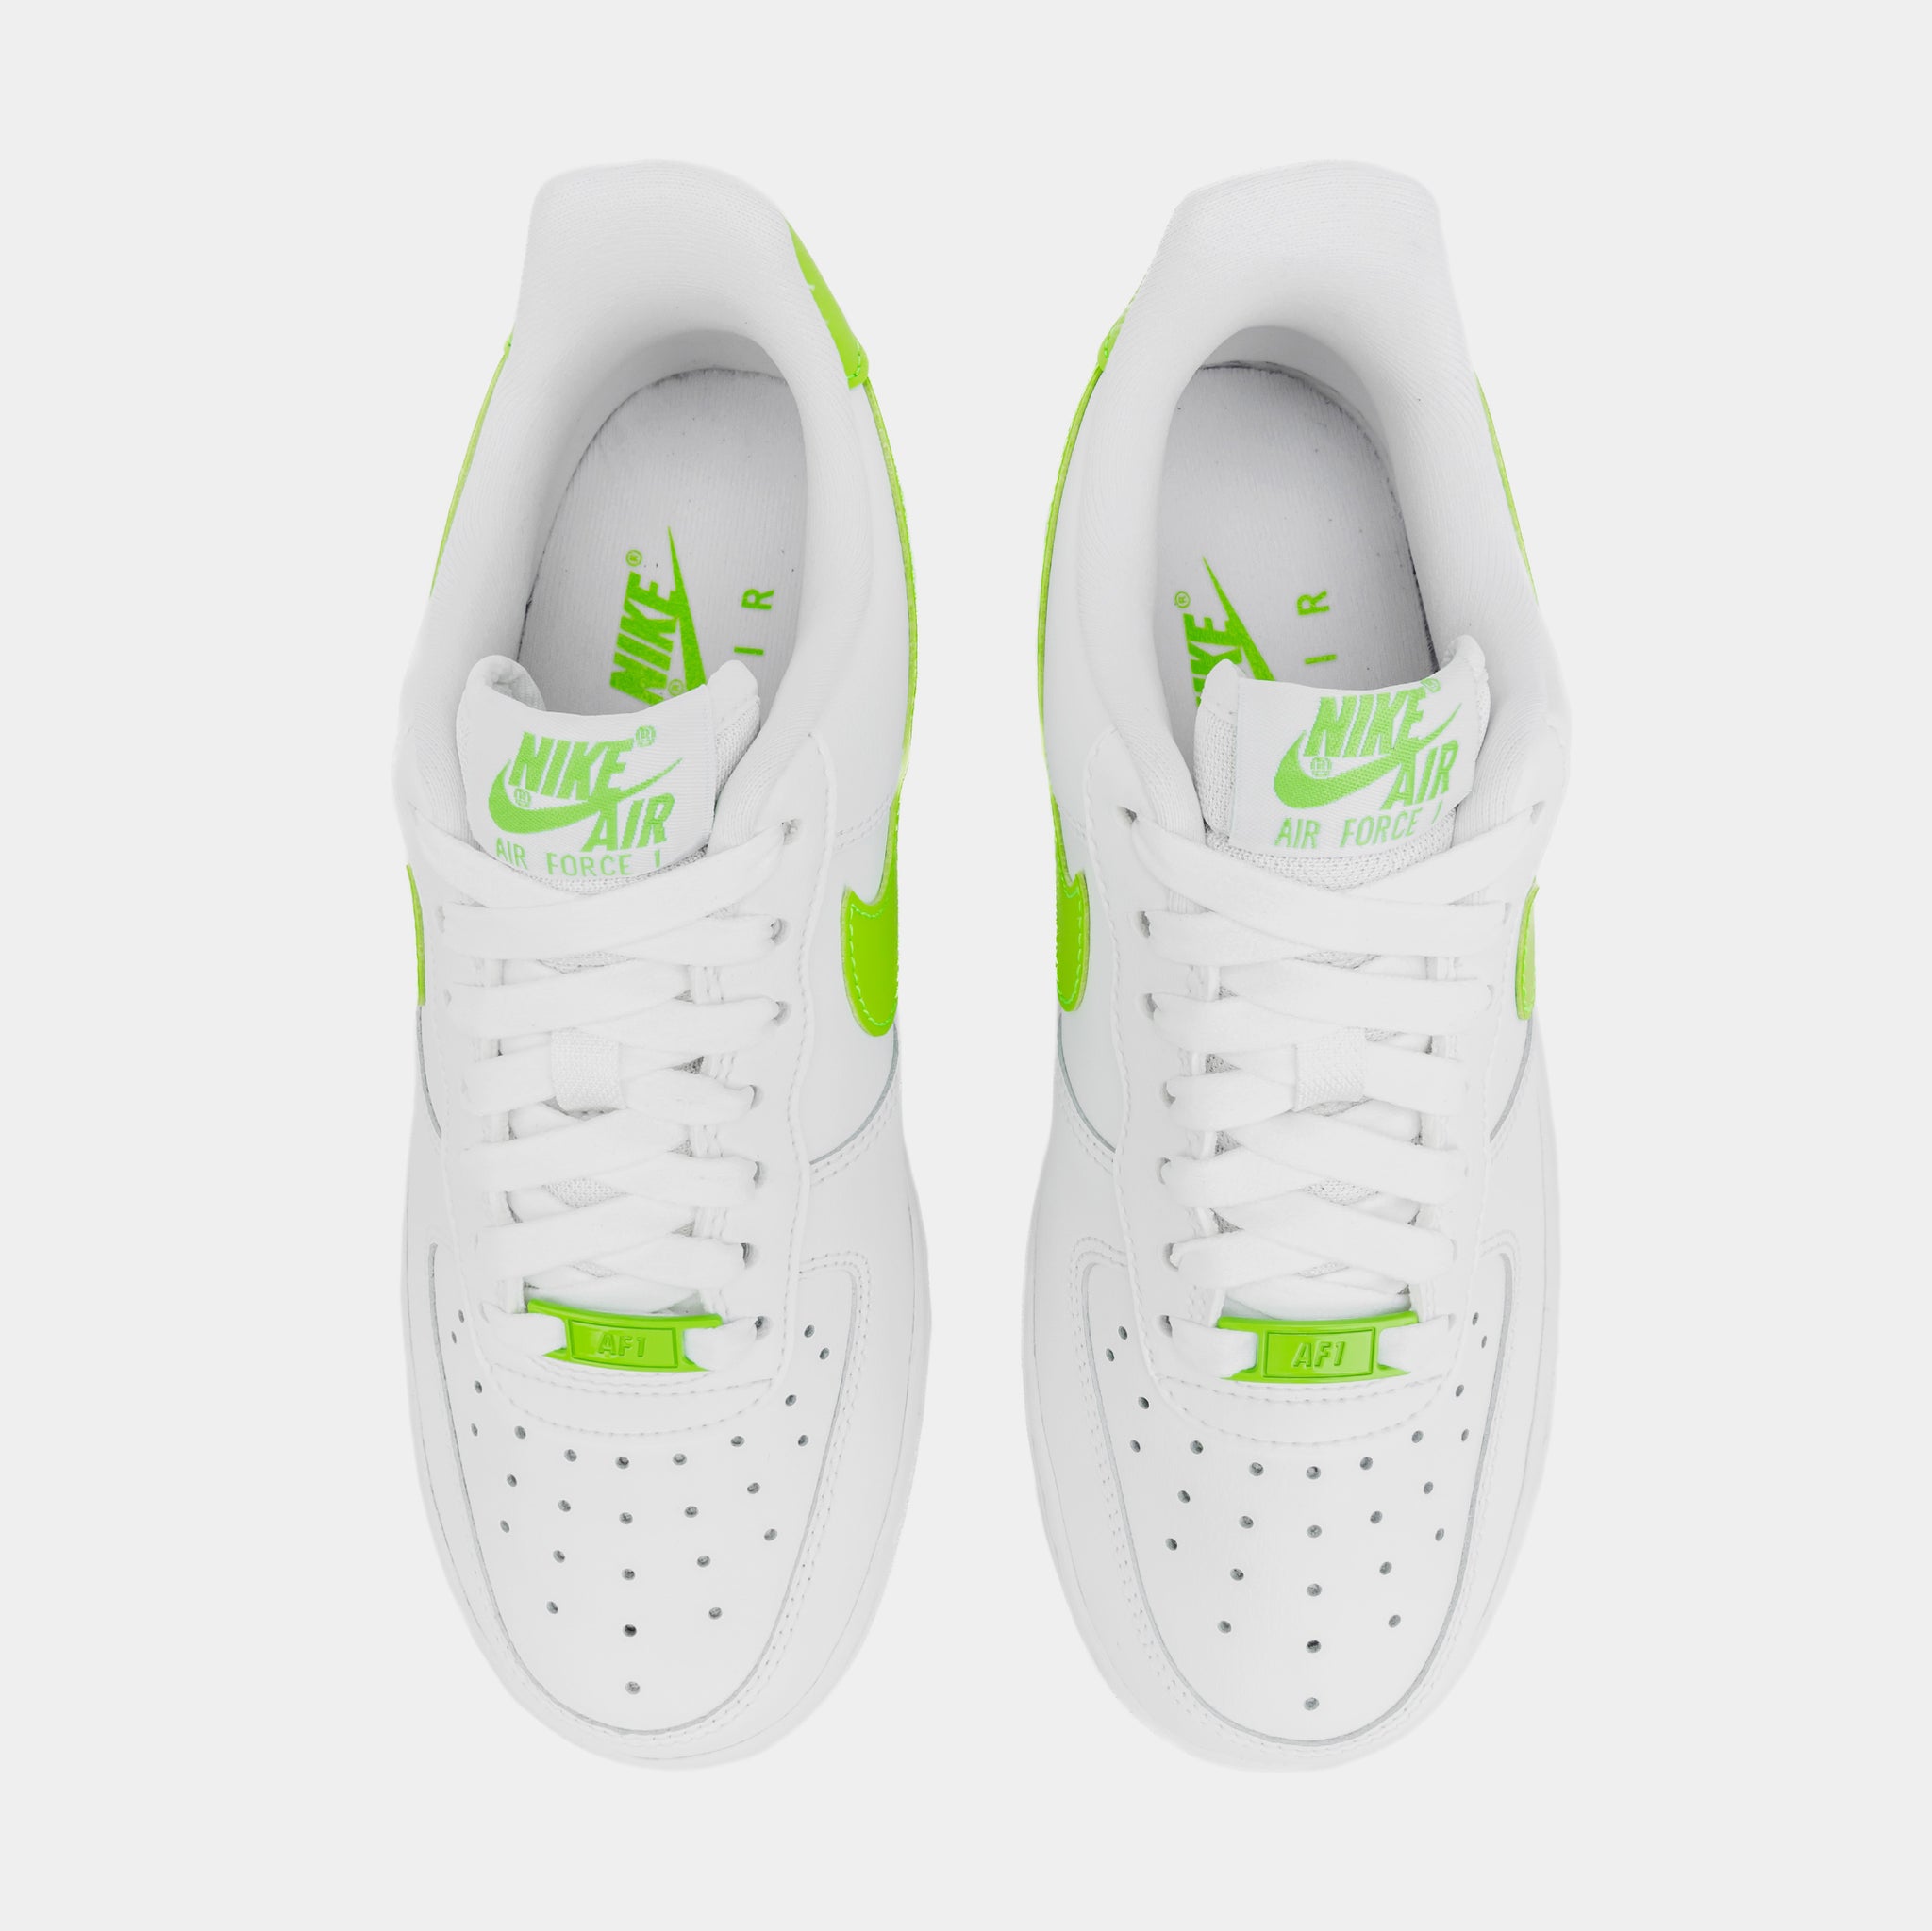 Nike Air Force 1 '07 Womens Lifestyle Shoes White Green DD8959-112